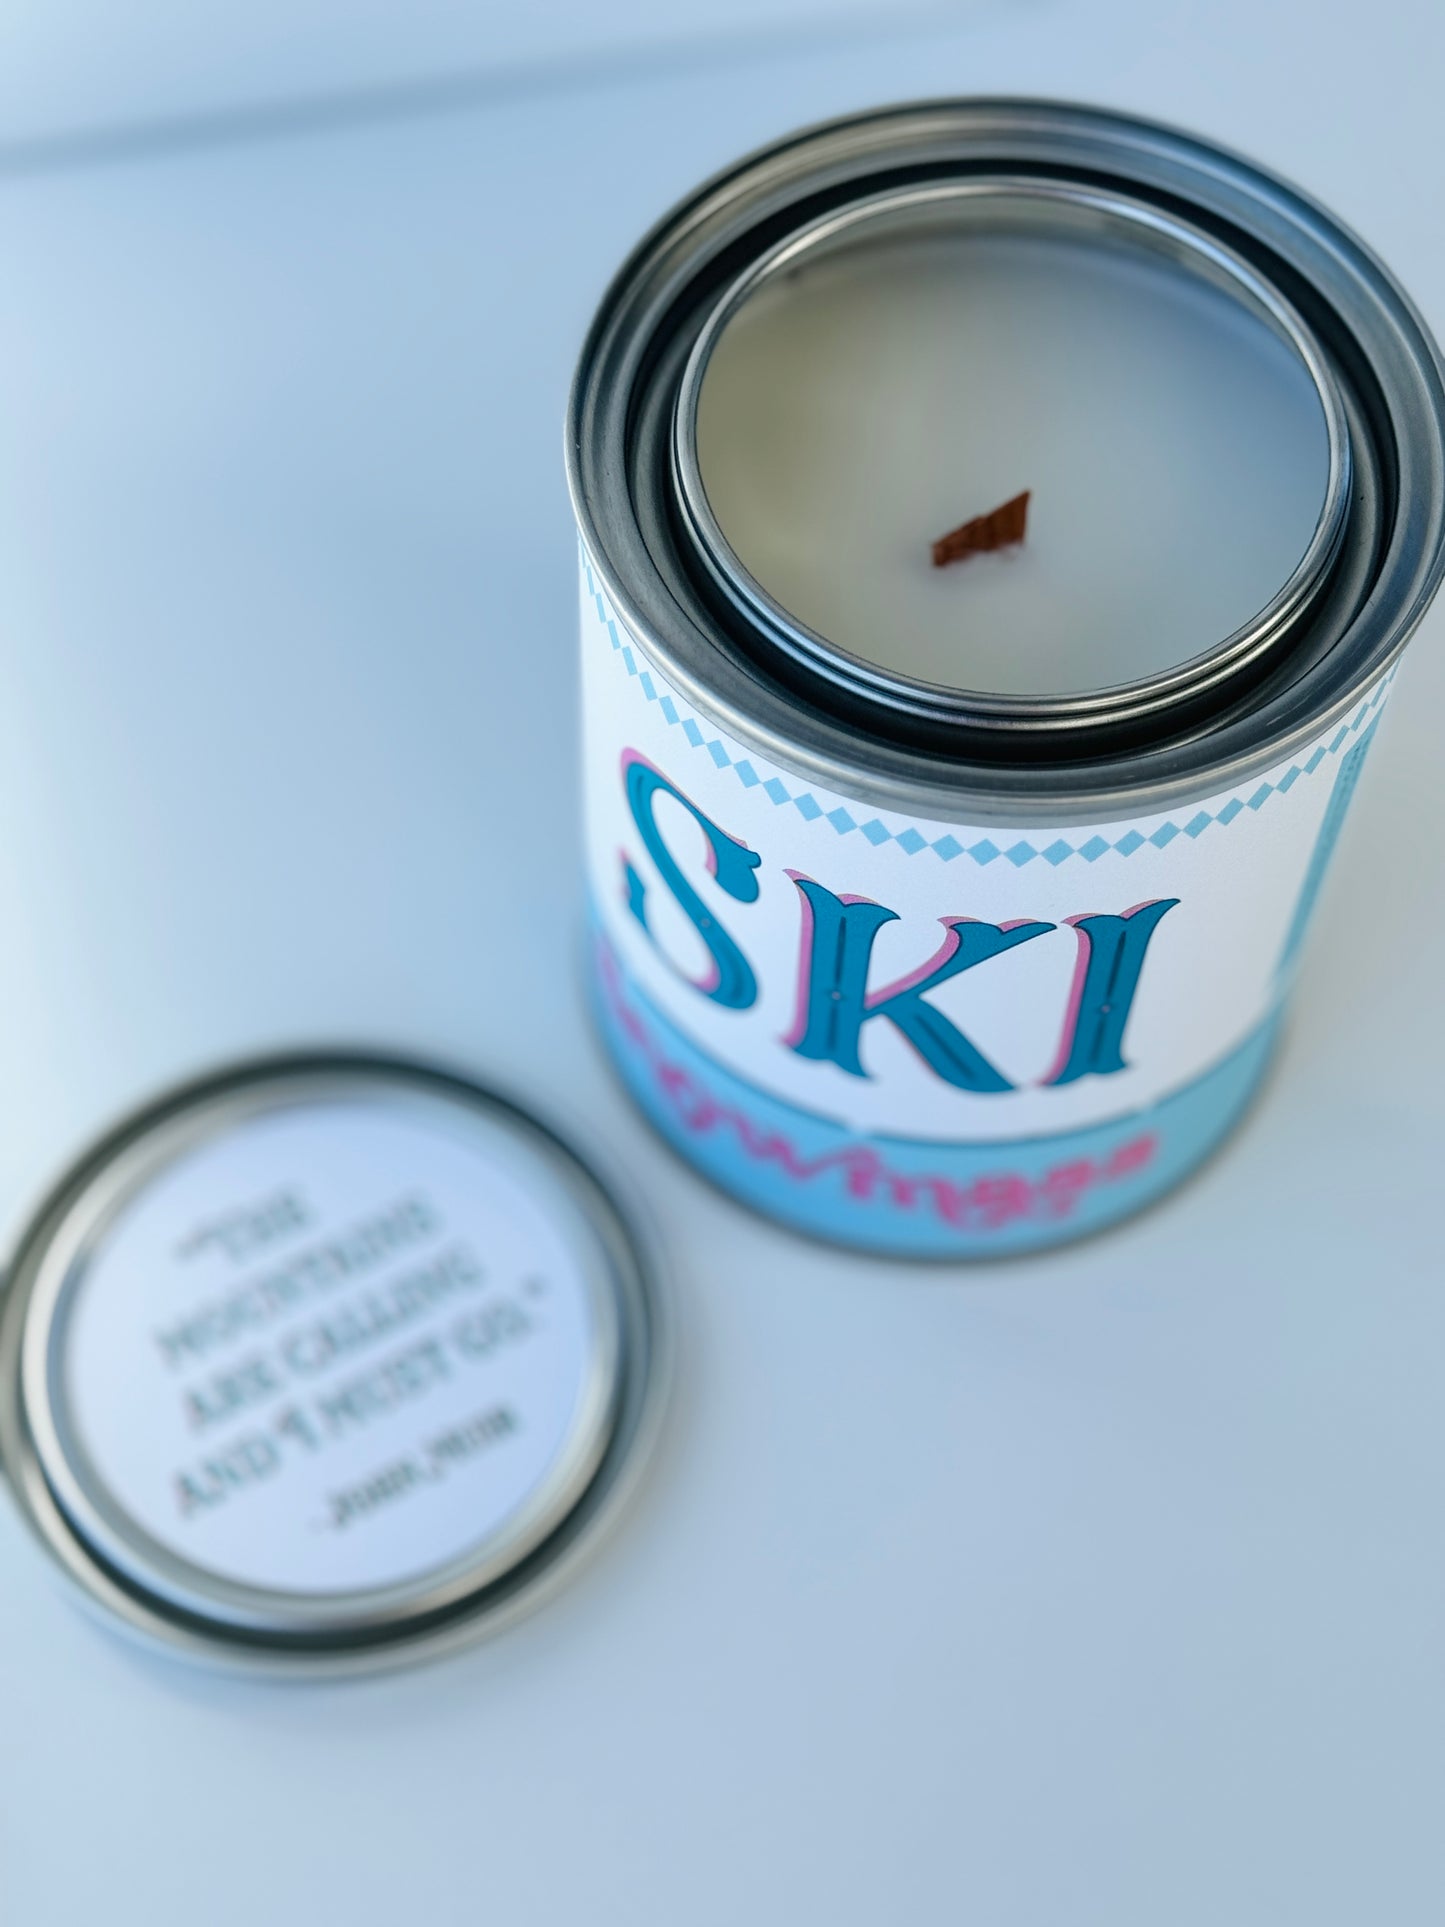 Hike Copper Mountain - Paint Tin Candle